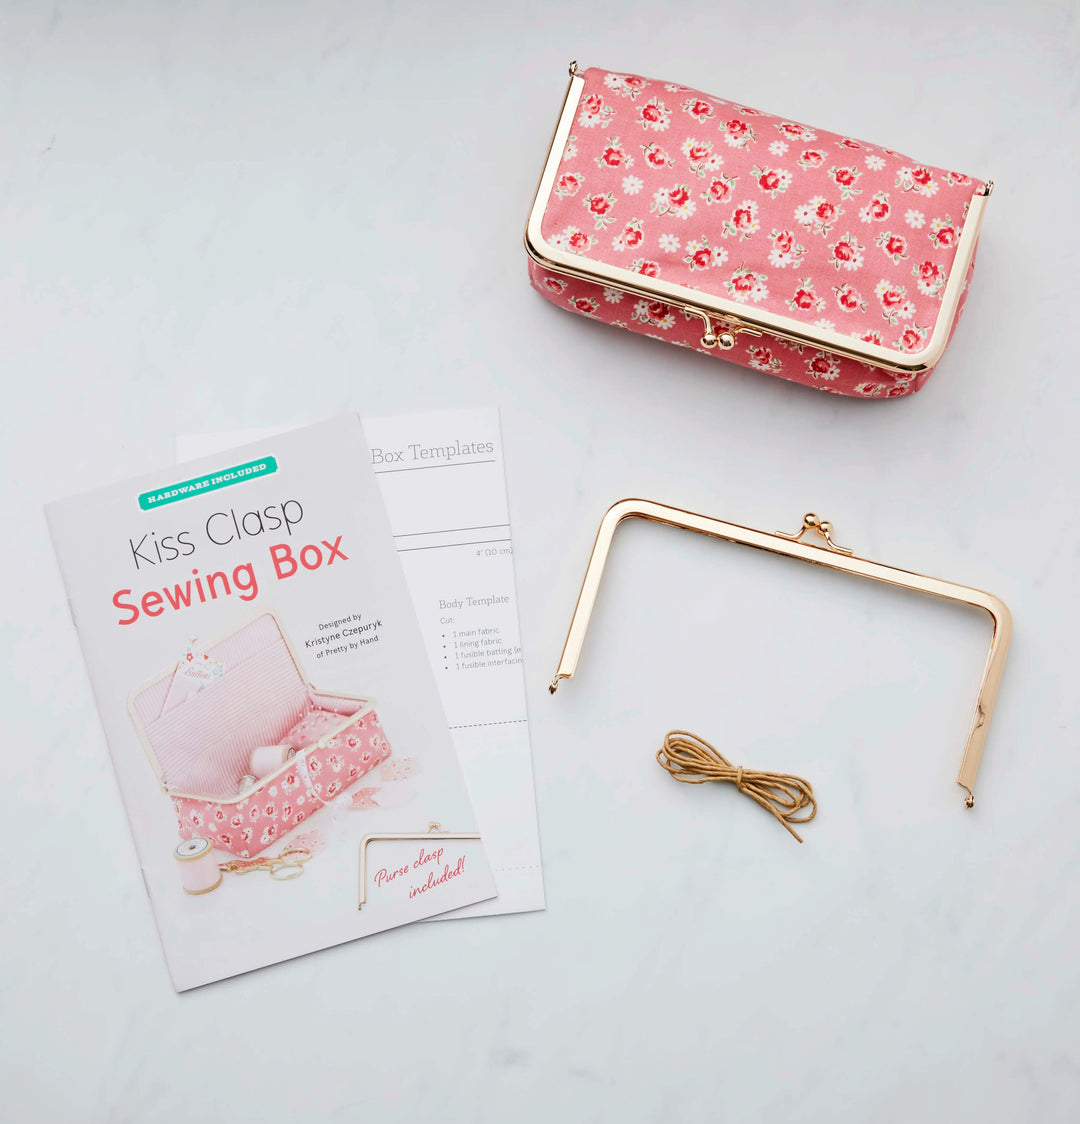 Craftermoon - Kiss Clasp Sewing Box Pattern 4